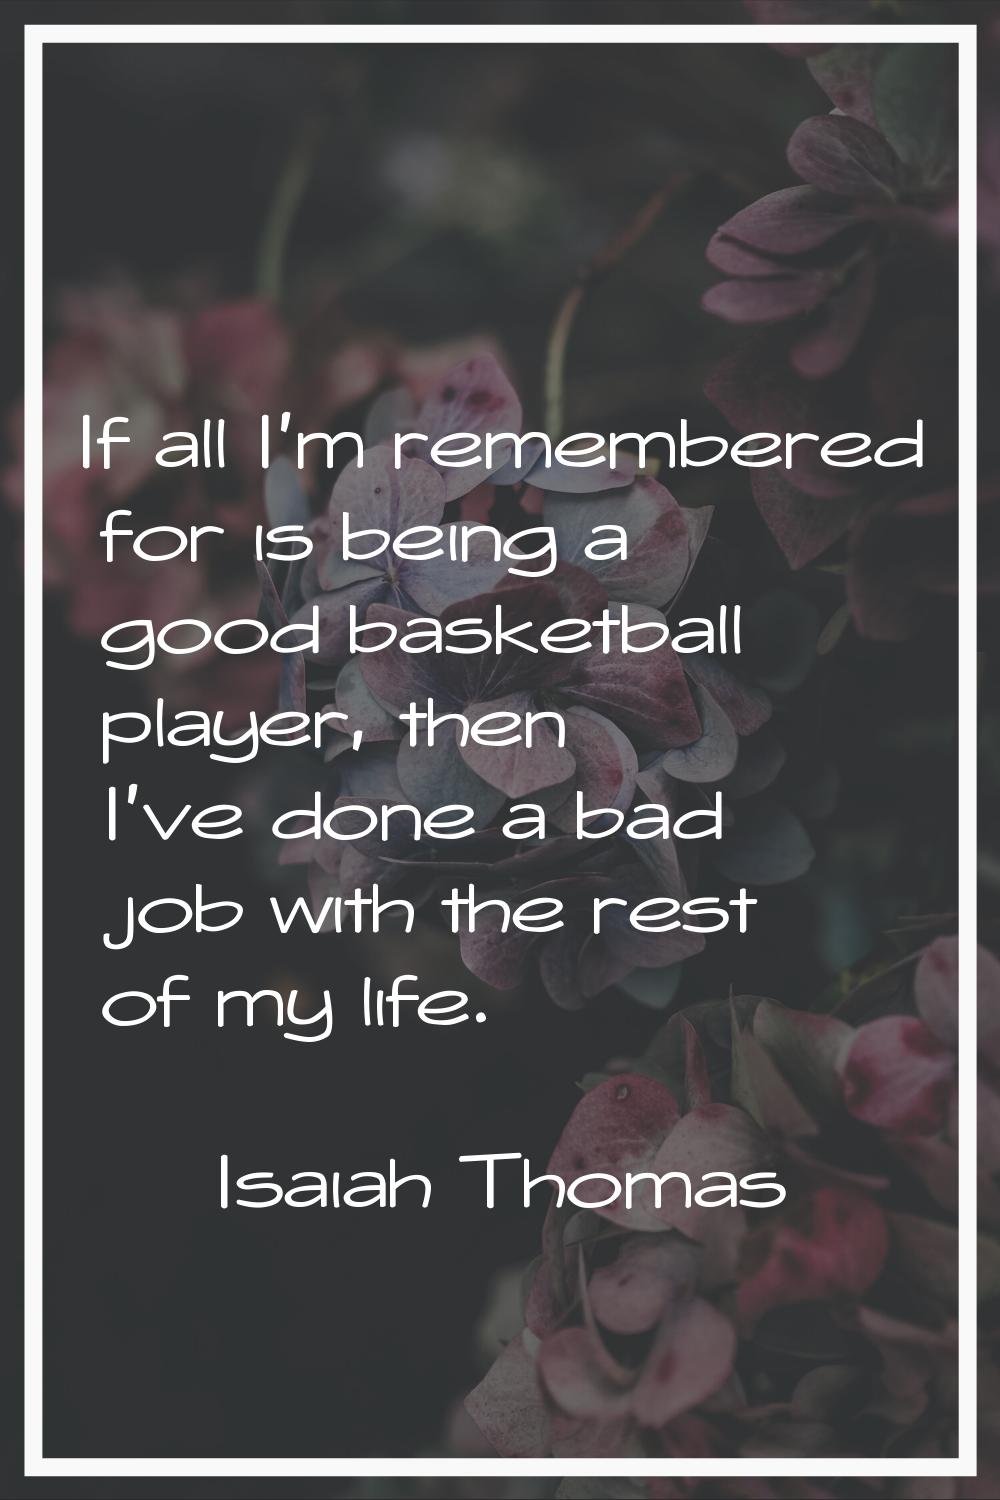 If all I'm remembered for is being a good basketball player, then I've done a bad job with the rest